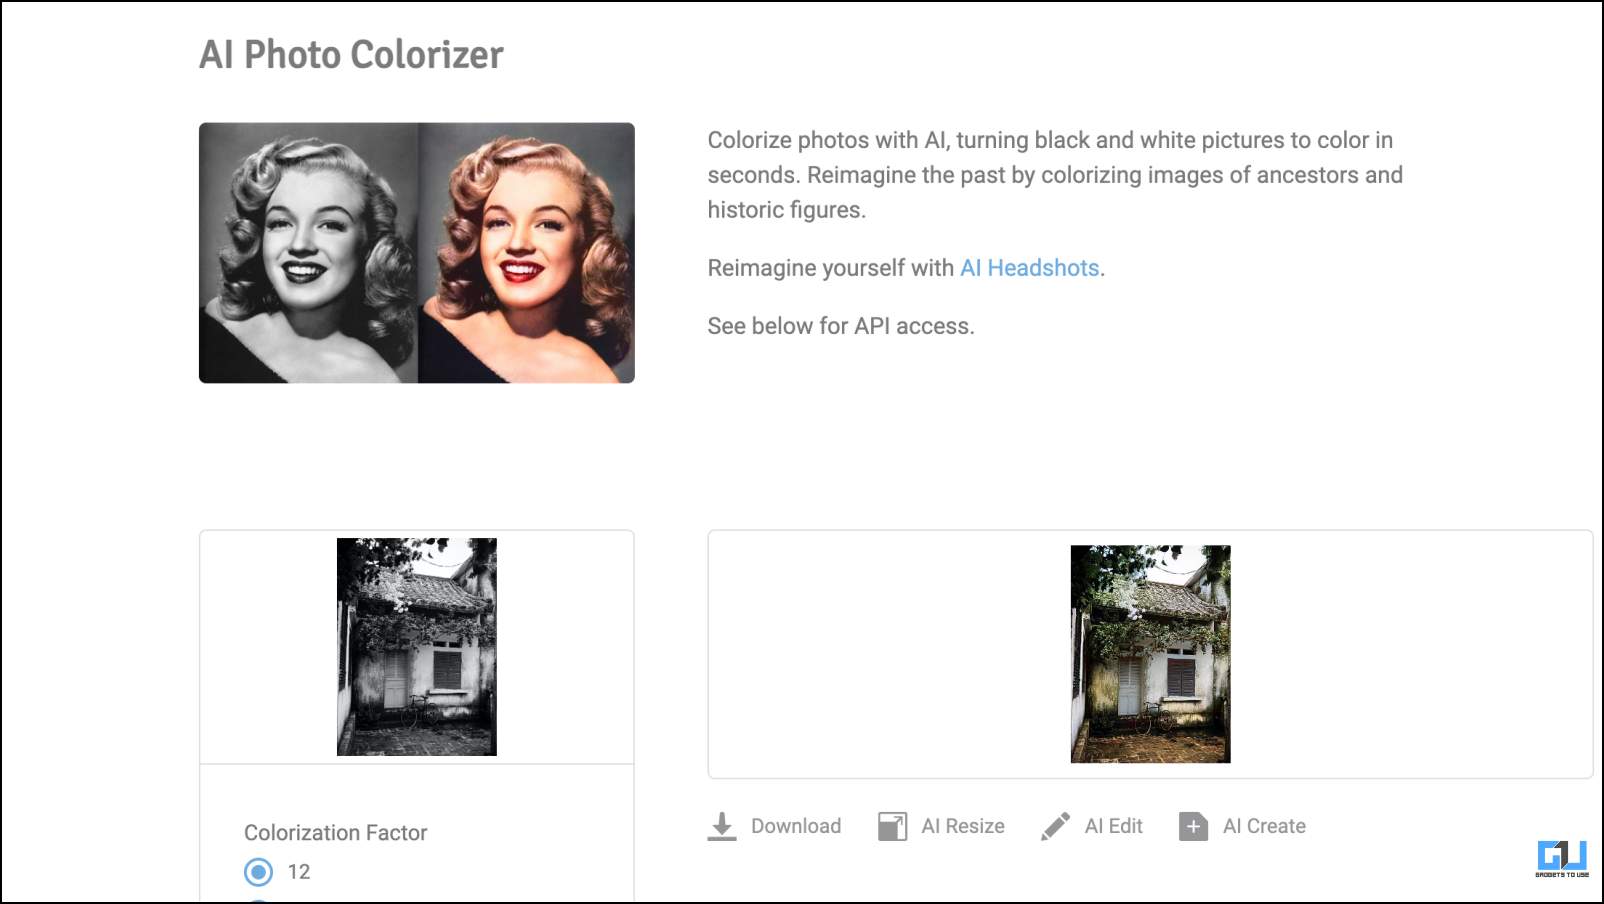 colorize black and white photos with Hotpot AI